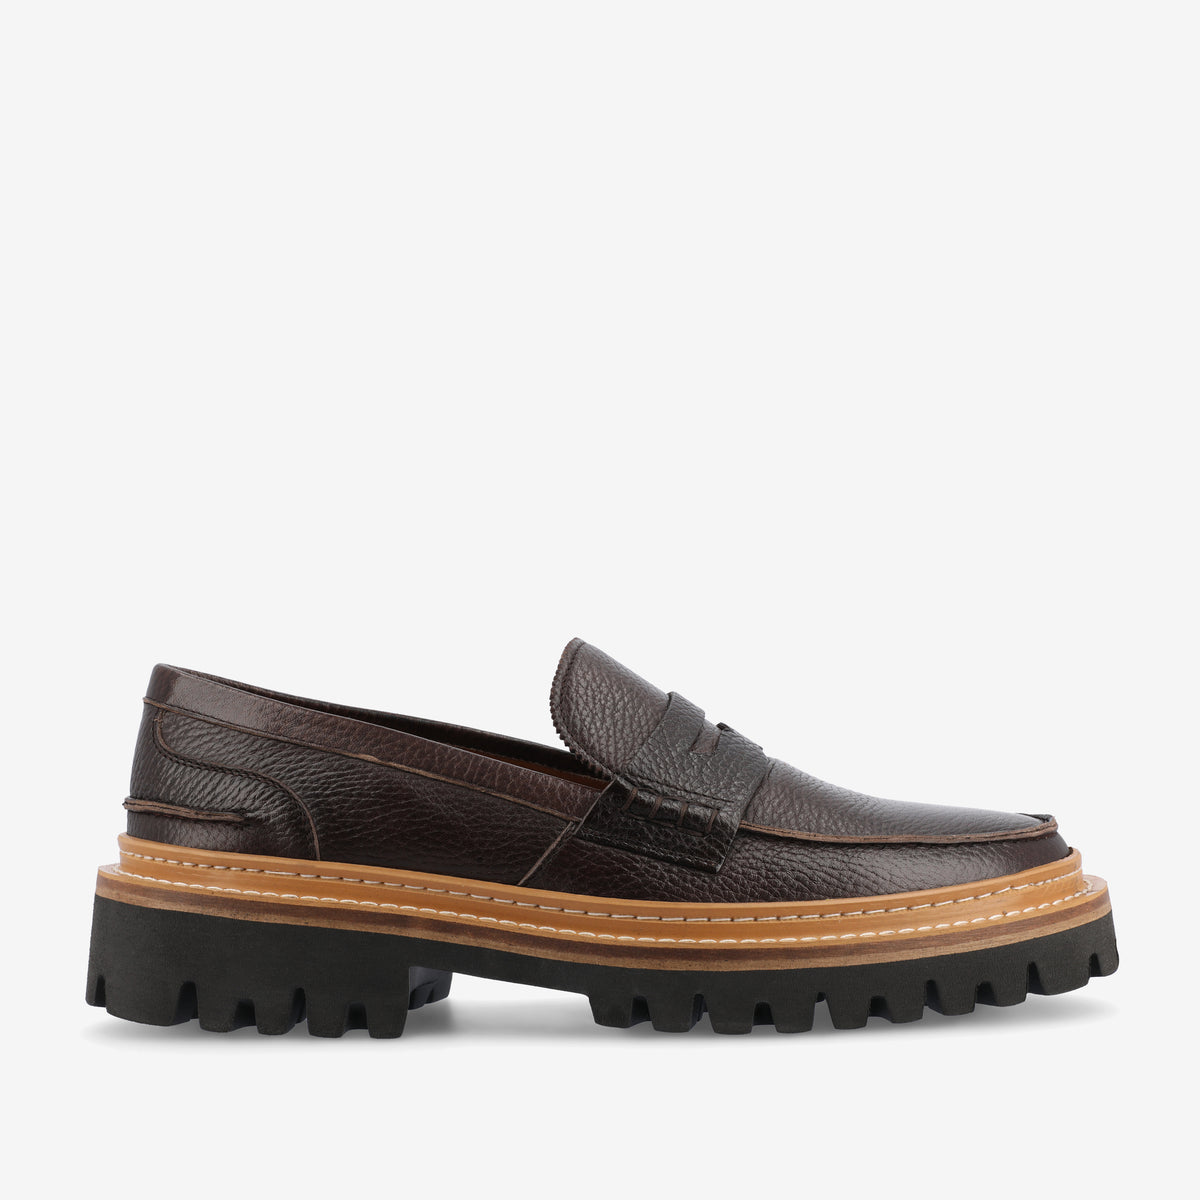 The Country Loafer in Coffee